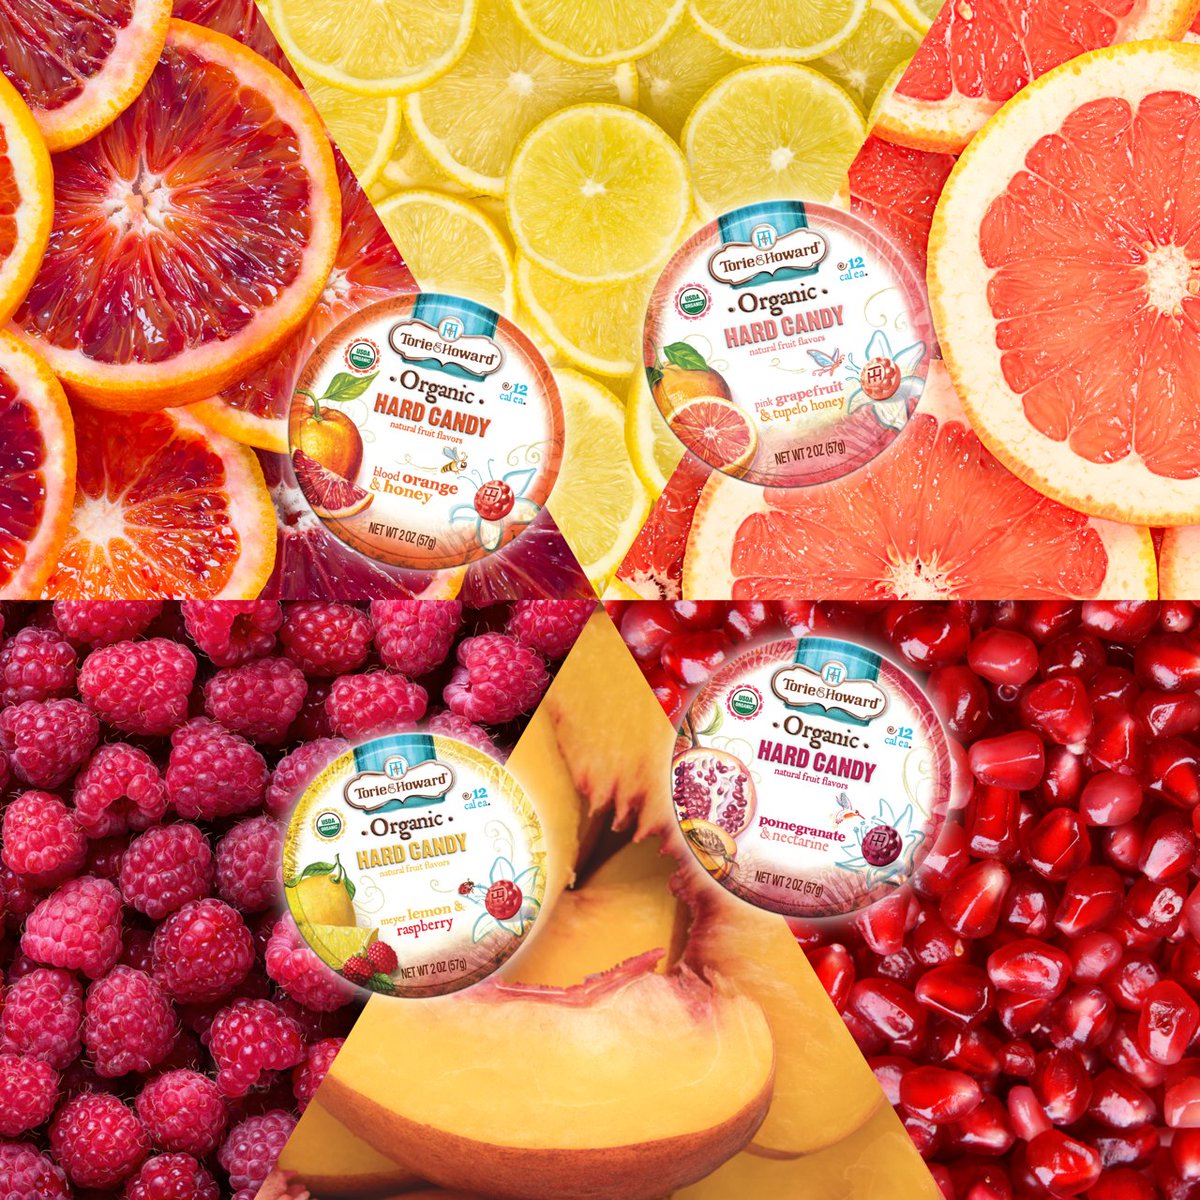 Are you Team Citrus 🍊 or Team Berry 🍓? Comment below and let us know which flavor combo is your fav! 🌟💬

🛒 bit.ly/3u1FCmY

#TorieandHoward #organiccandy #noartificialingredients #glutenfree #dairyfree